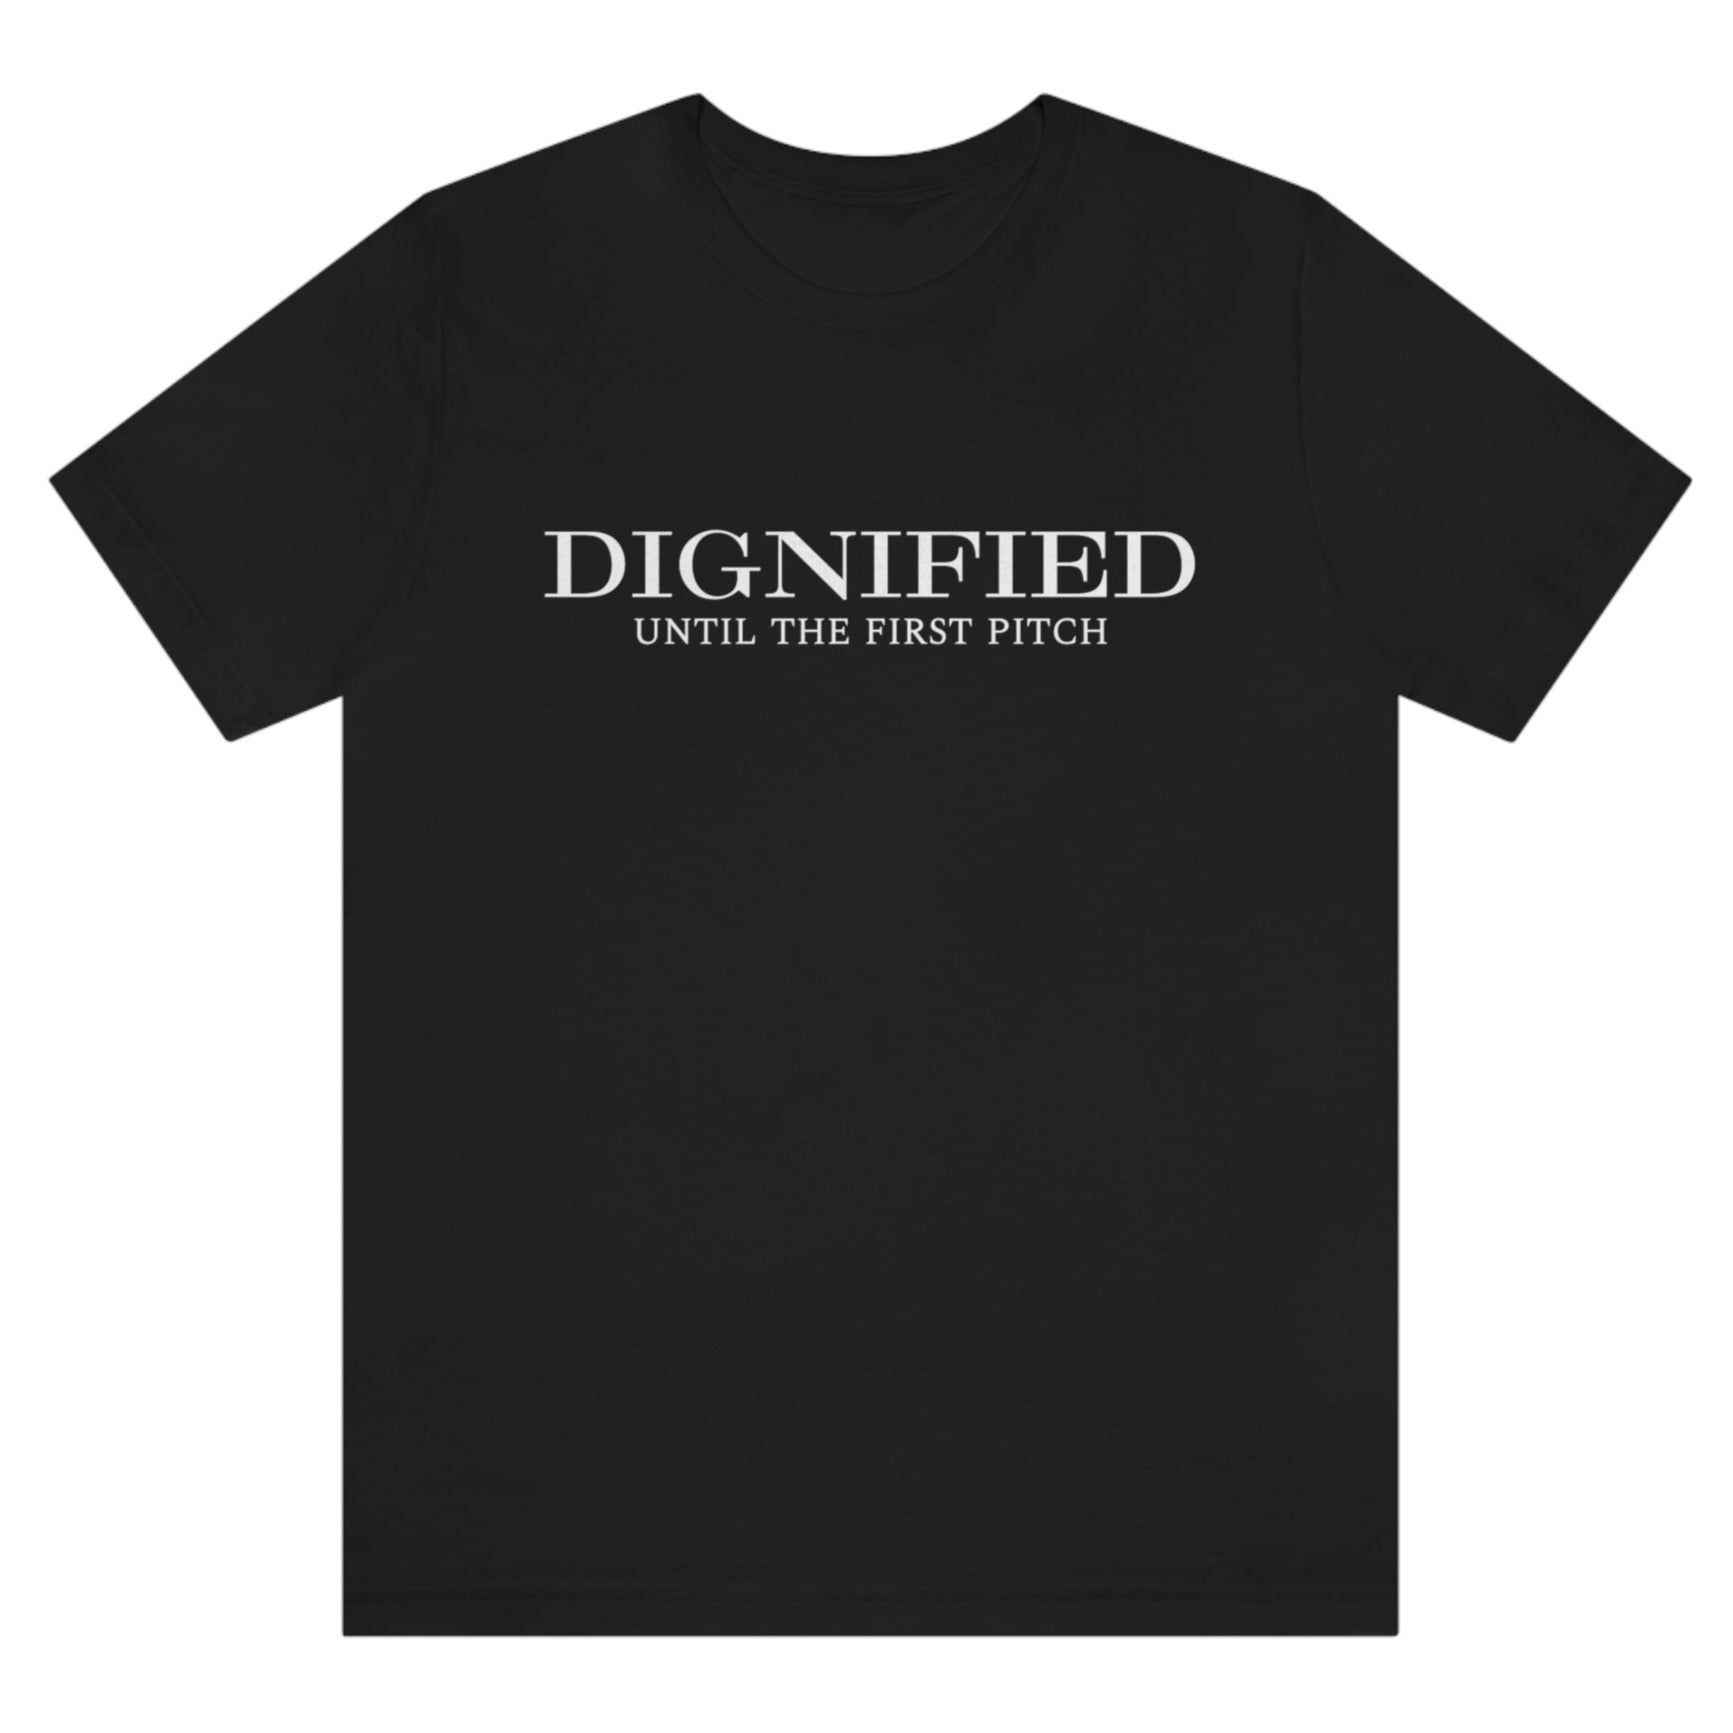 dignified-until-the-firstpitch-black-t-shirt-mens-sports-baseball